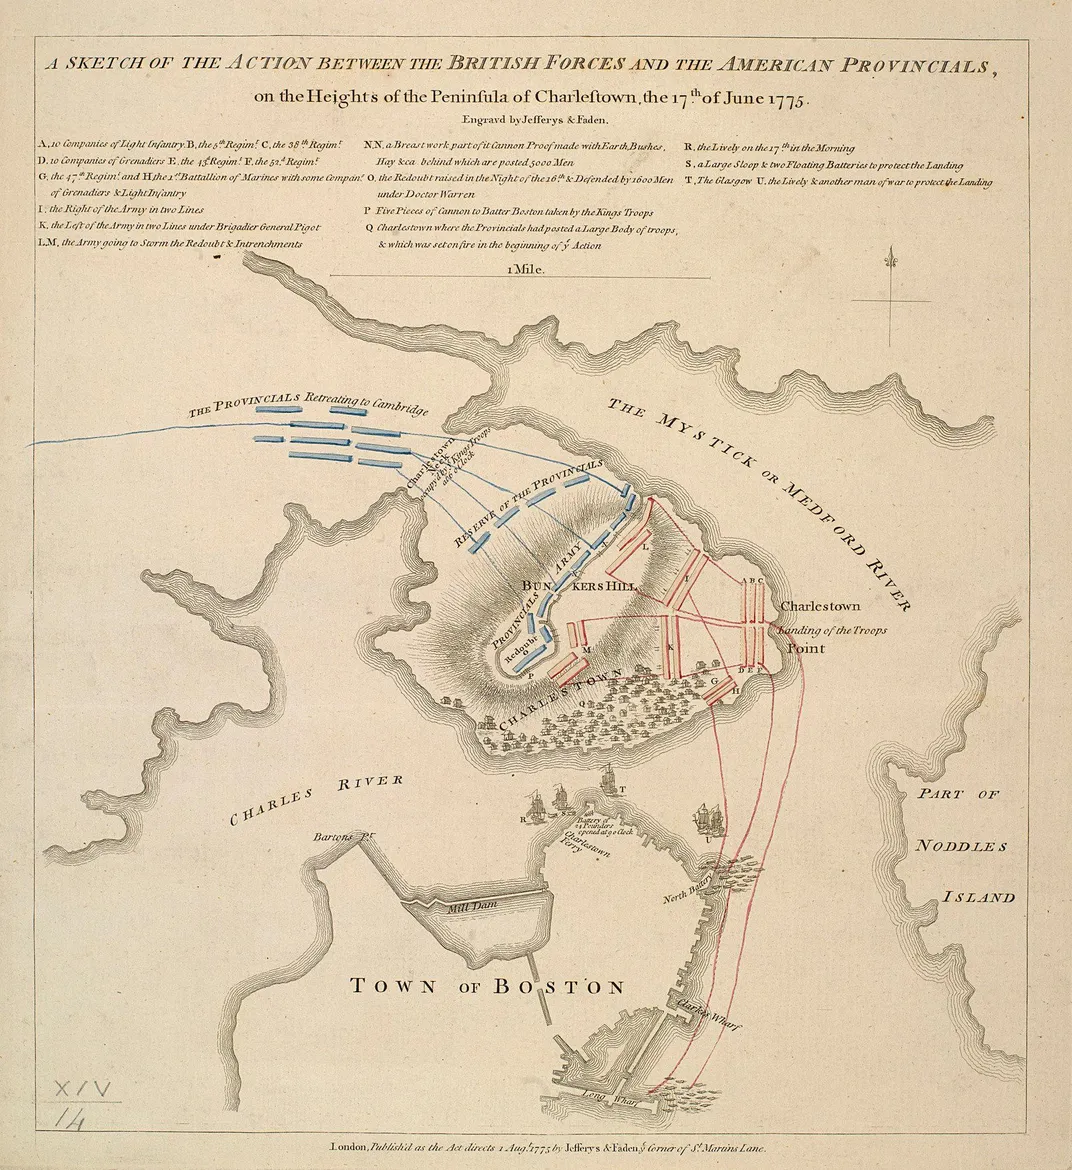 A sketch of the action between the British forces and the American provincials - Bunker Hill